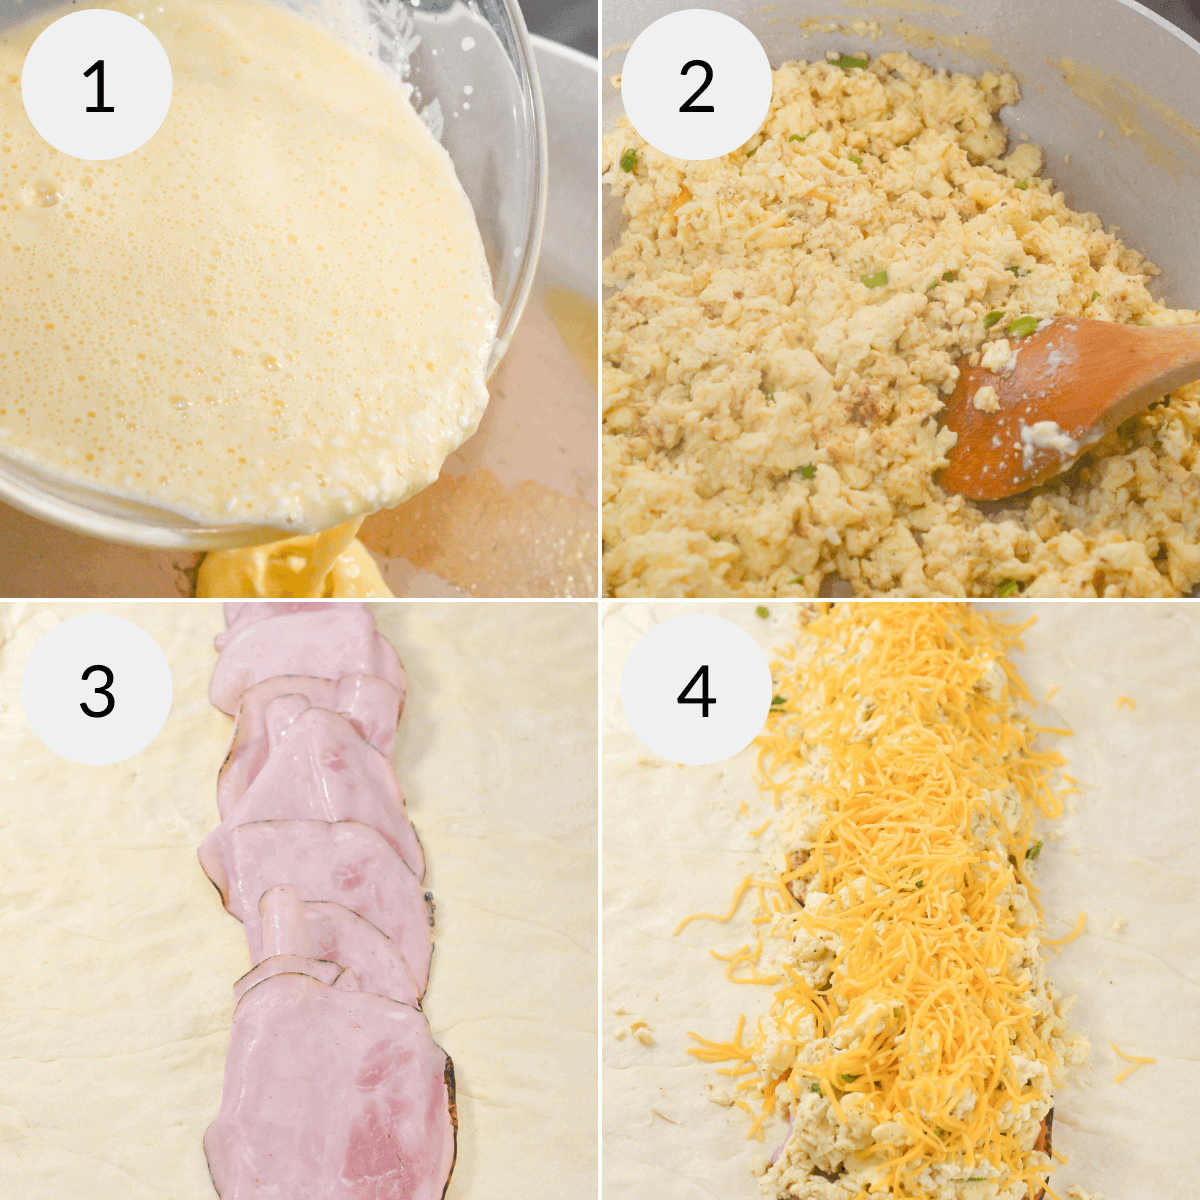 Rolling out the ham and cheese mixture.